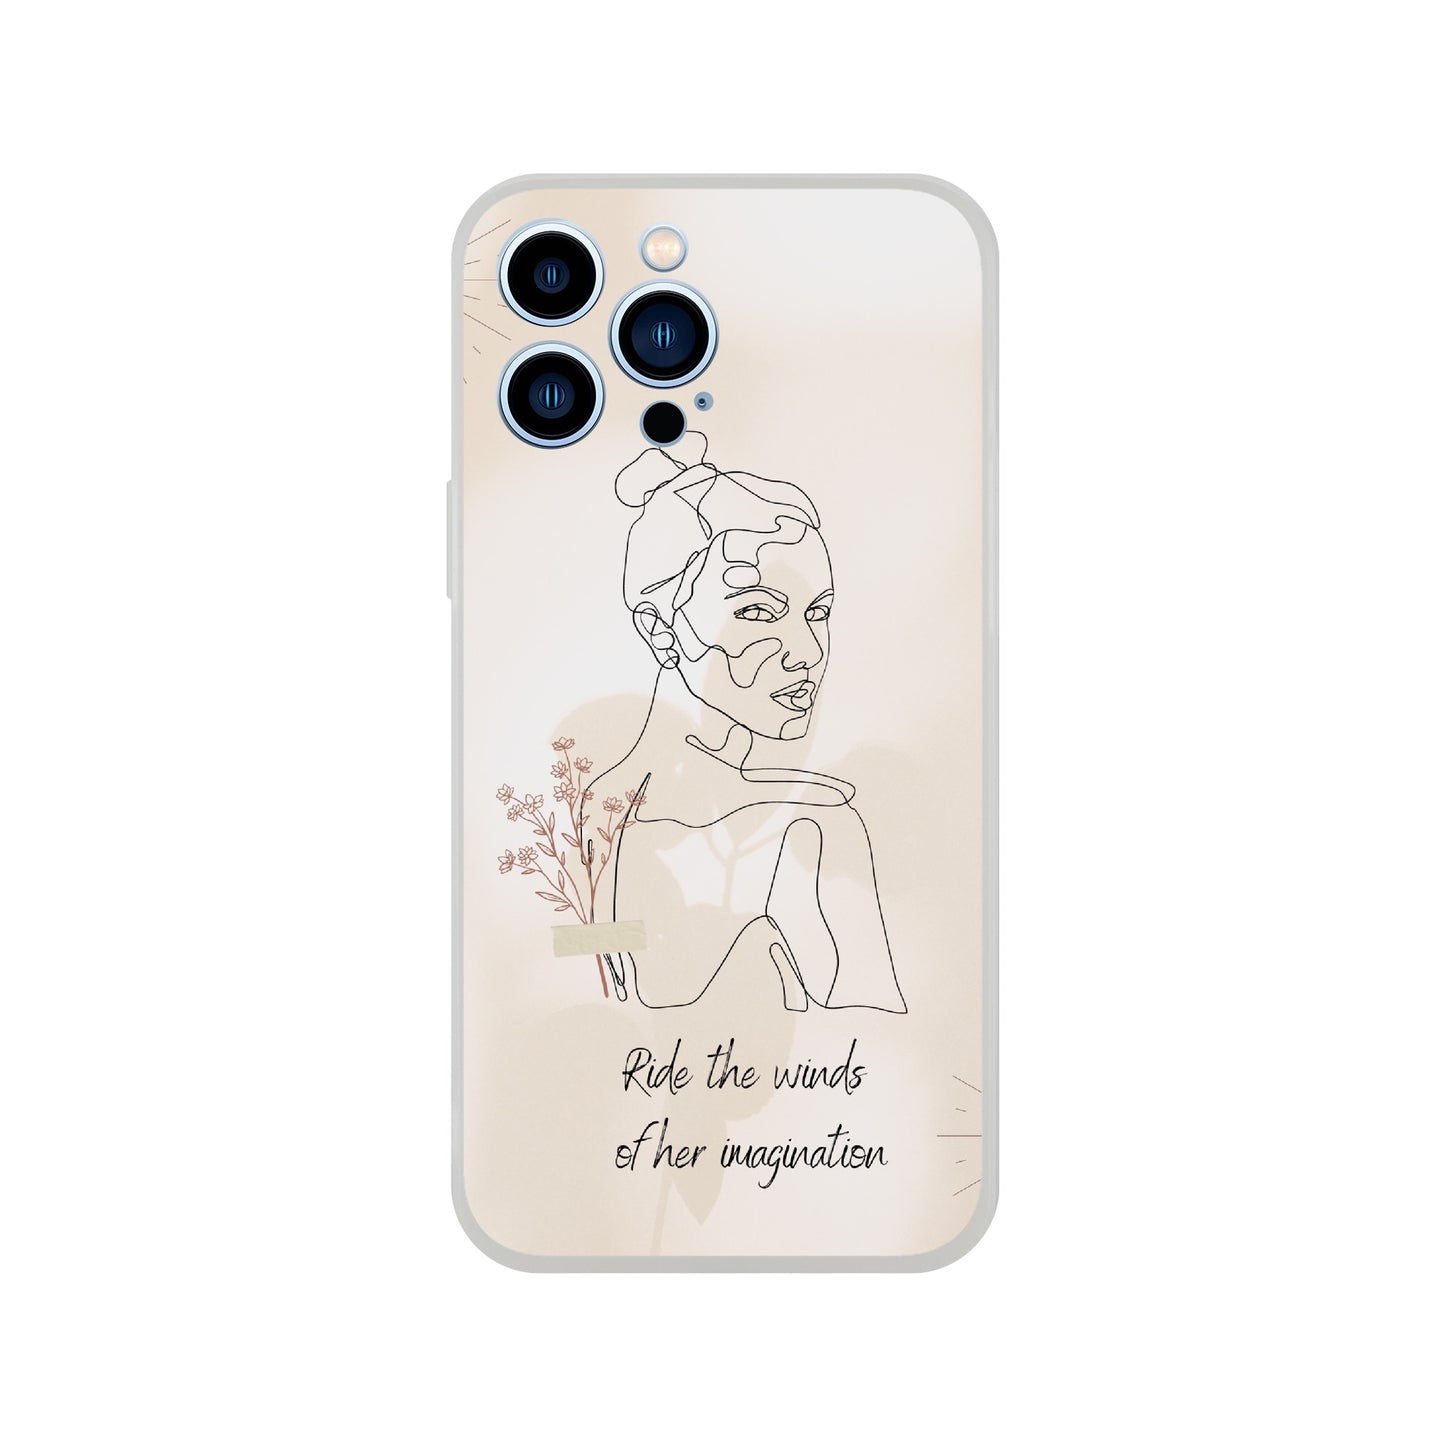 Ride the Winds of Her Imagination Flexi Case